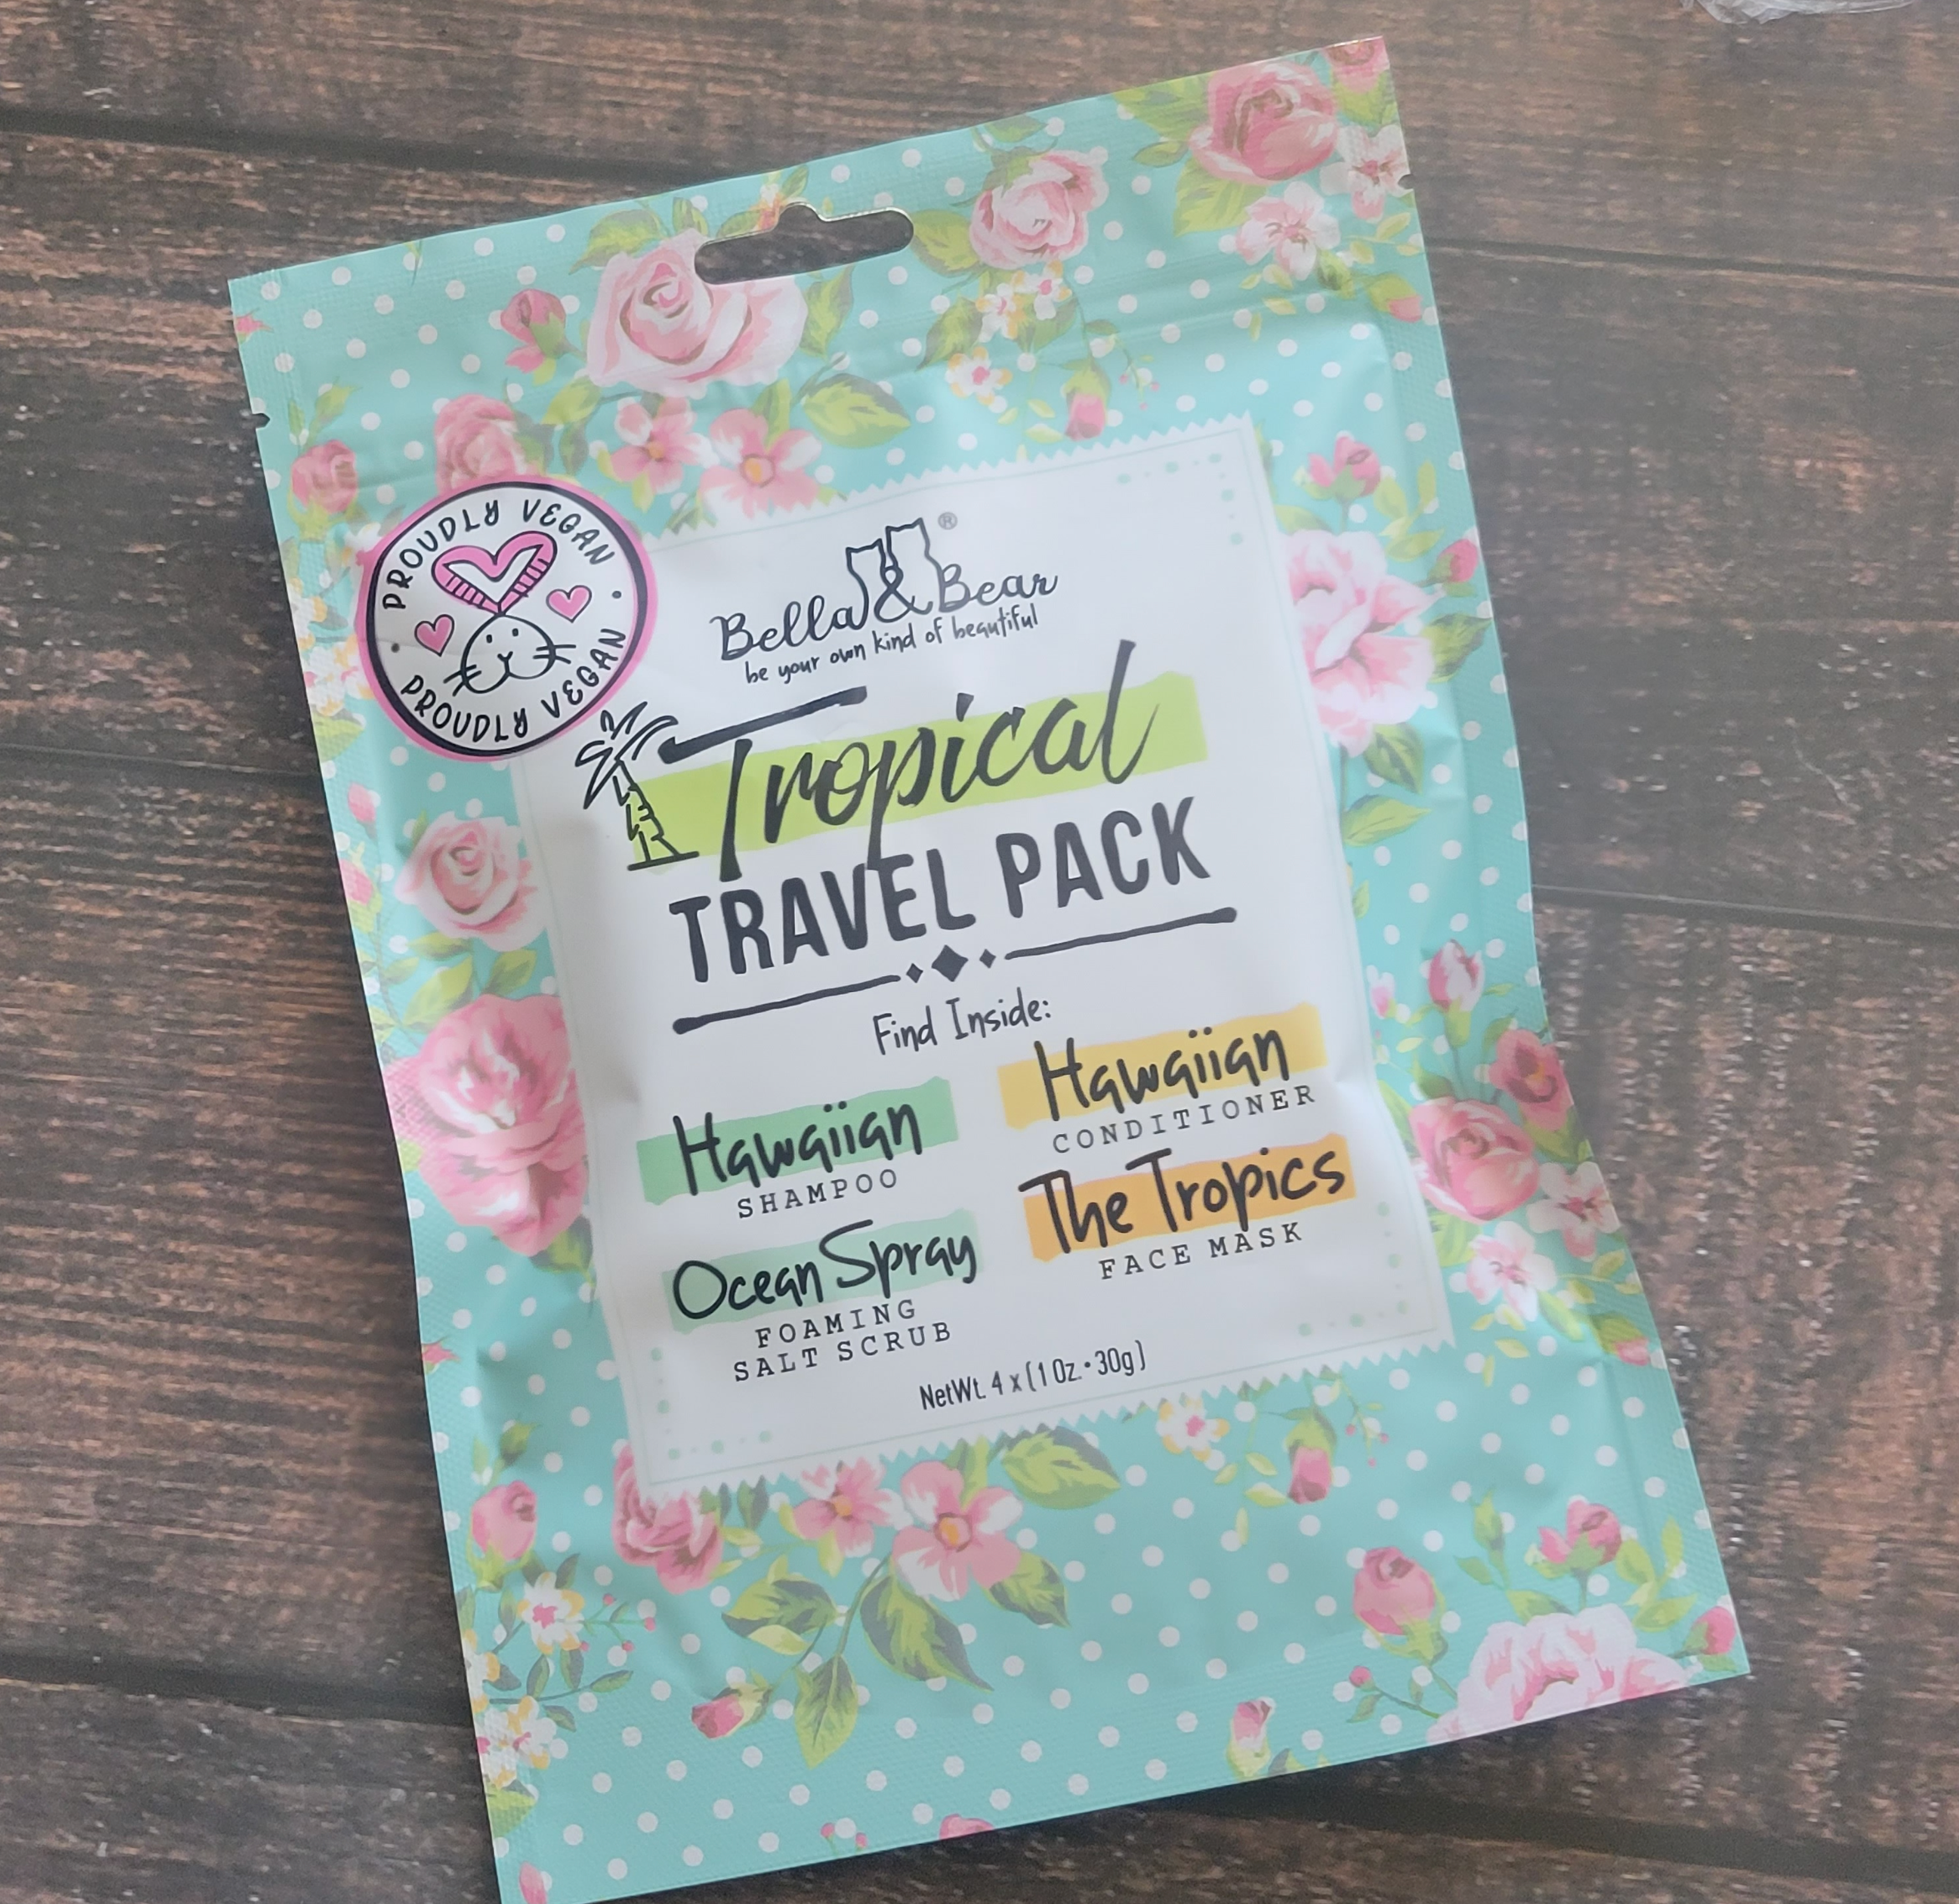 Tropical Travel Pack by Bella and Bear